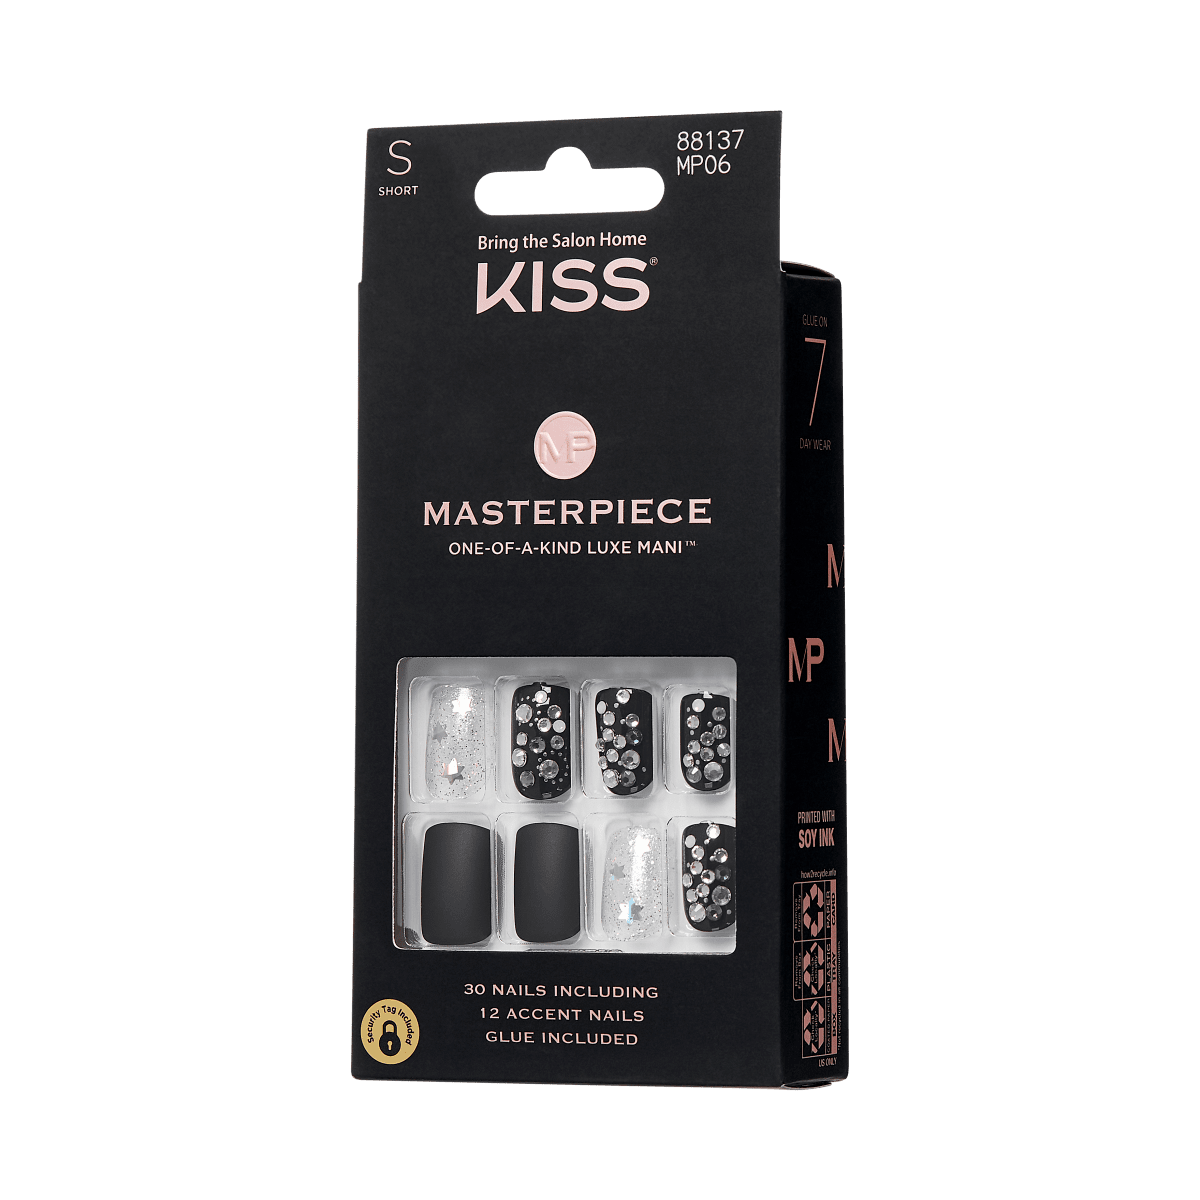 KISS Masterpiece, Press-On Nails, Show My Throne, Black, Short Squoval, 30ct